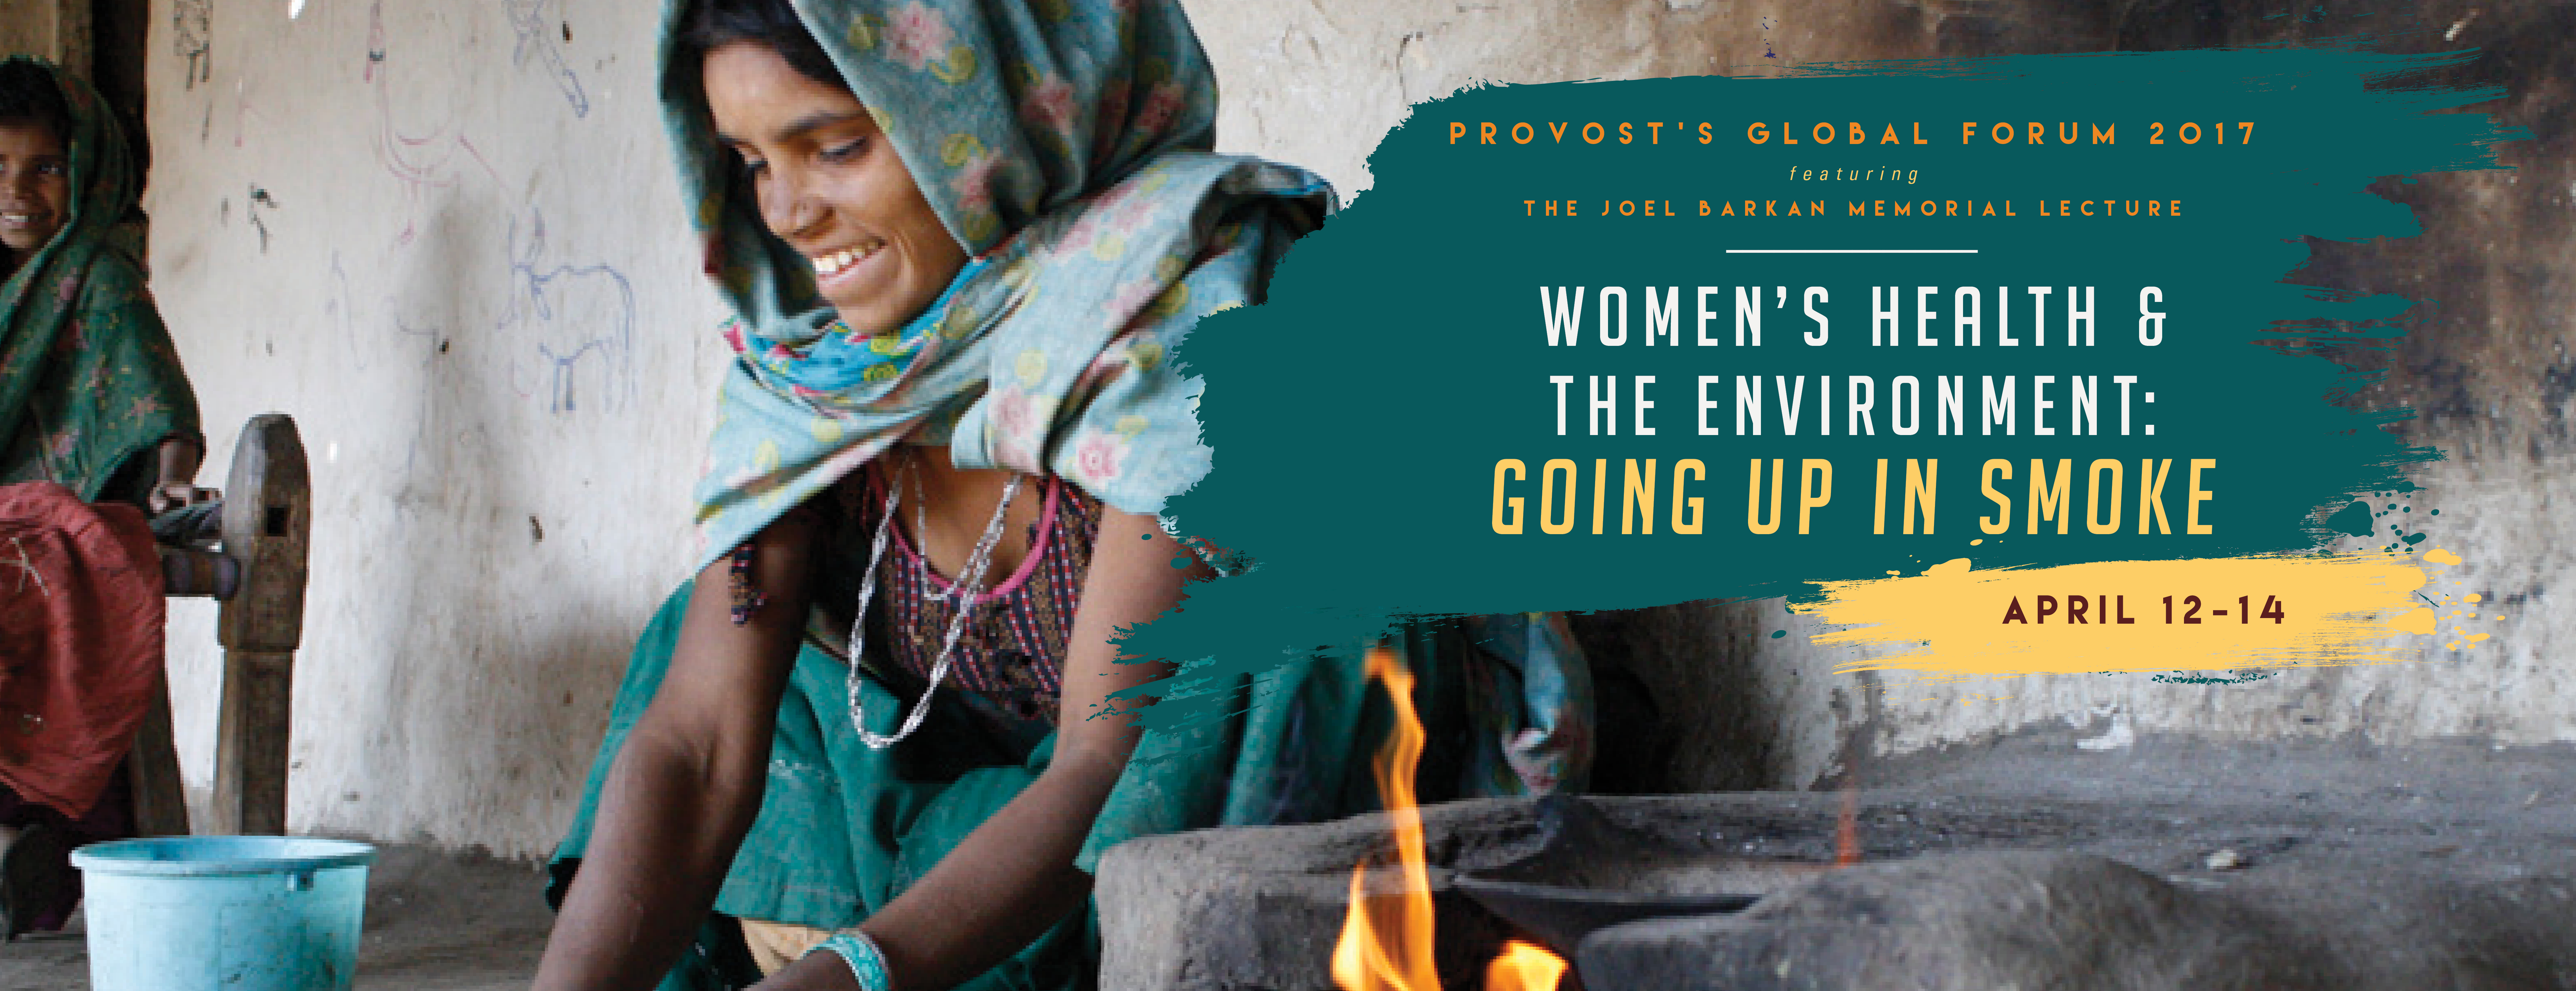 Women's Health and the Environment: Going up in Smoke, Provost's Global Forum